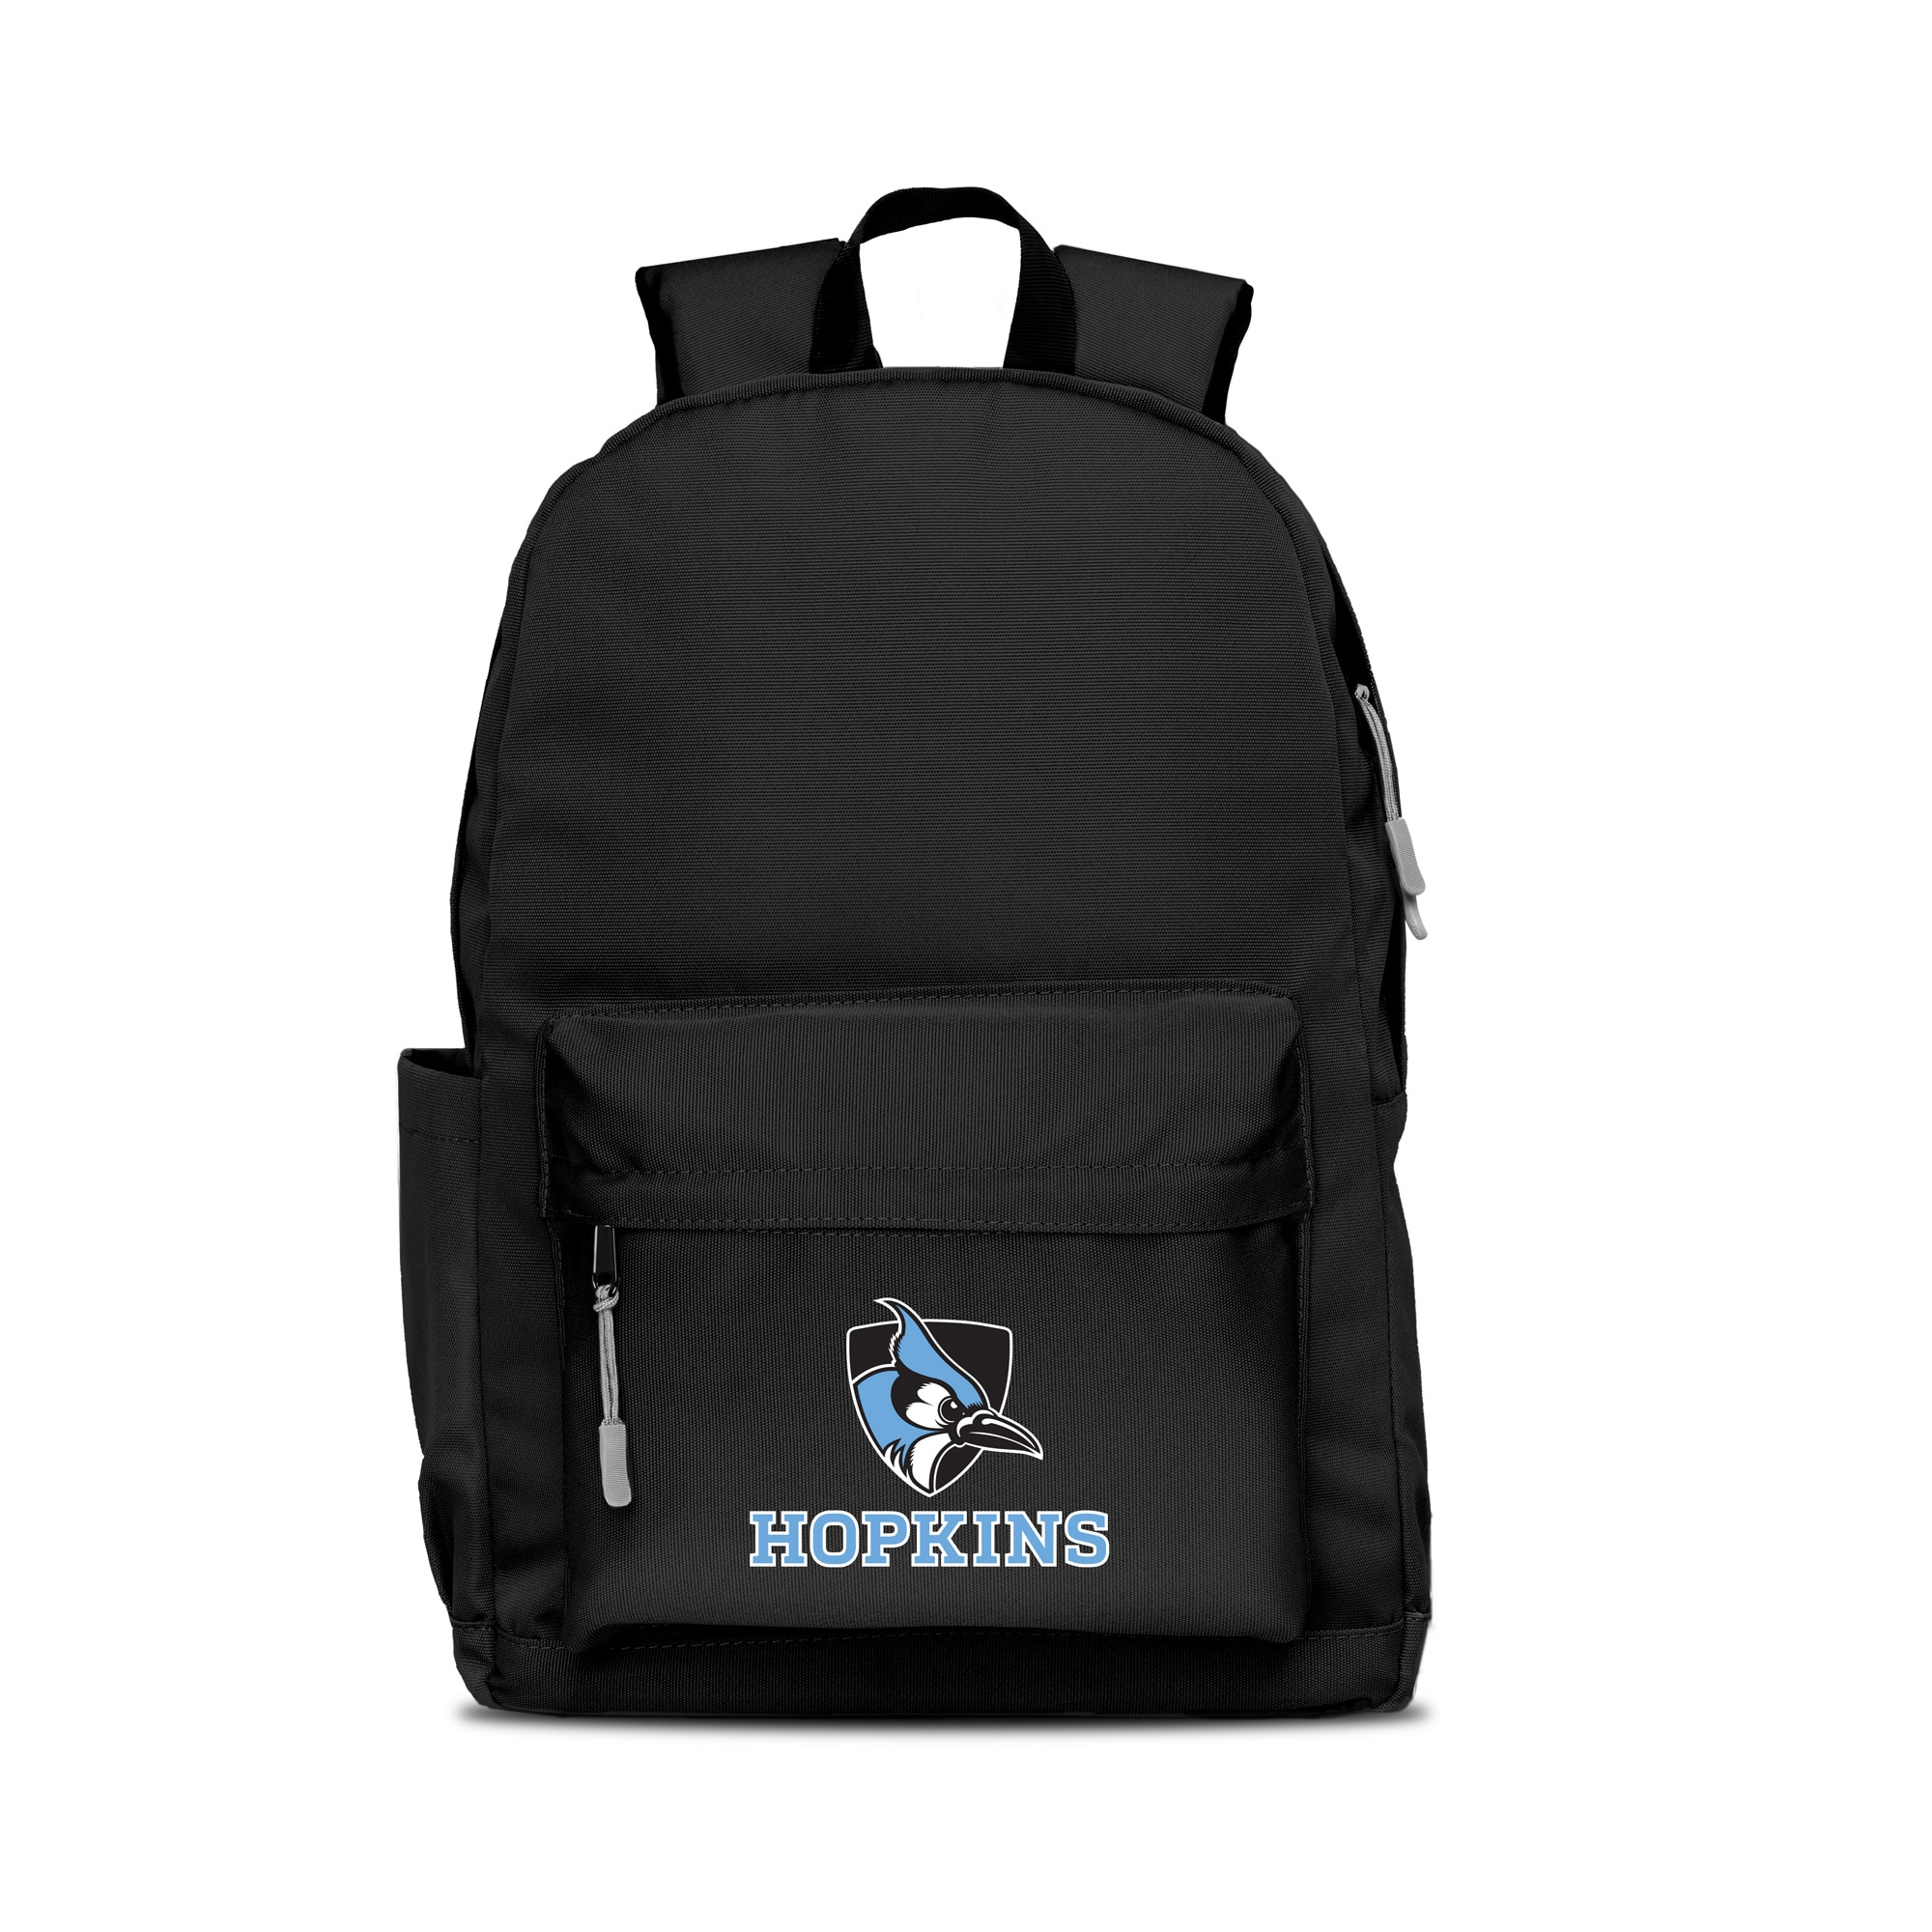 John's Hopkins Blue Jay L716 Campus Backpack Backpacks and Bags